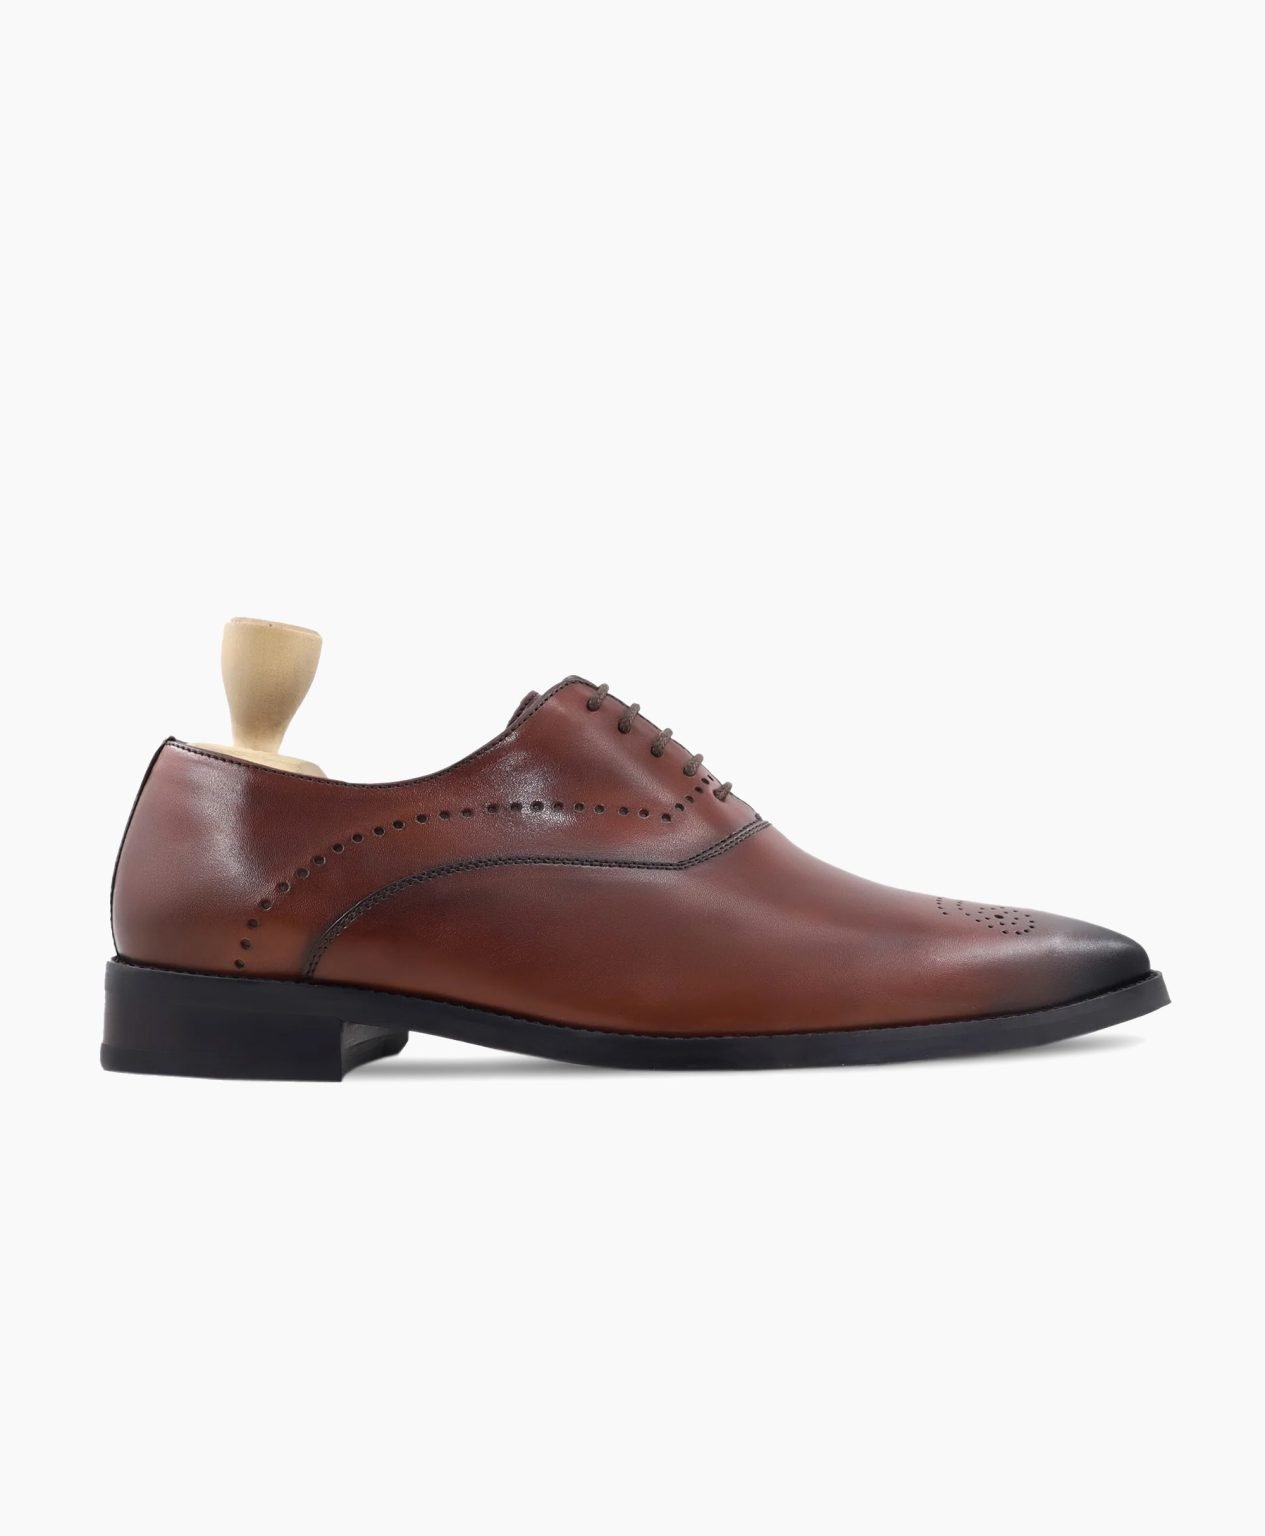 crewe-oxford-burnish-oxblood-leather-shoes-image201